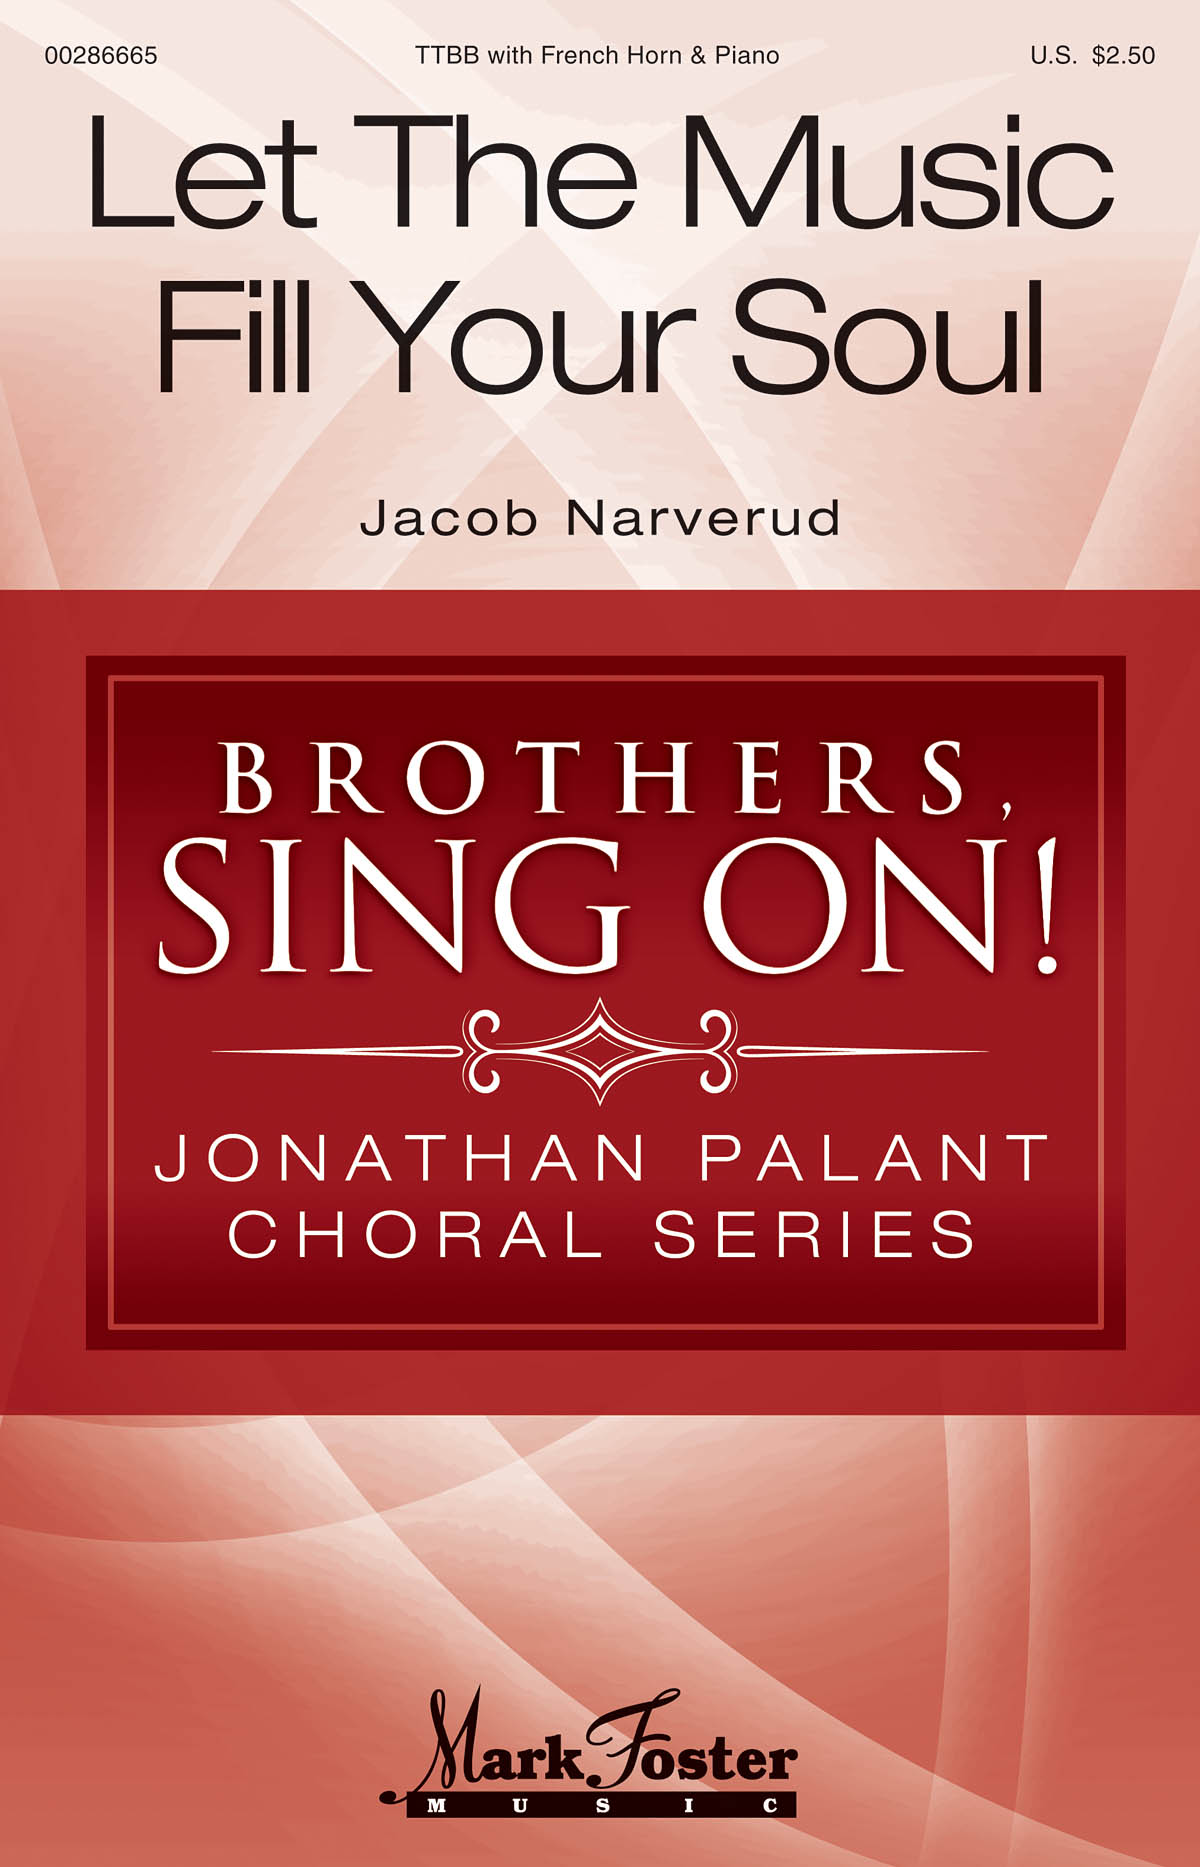 Jacob Narverud: Let the Music Fill Your Soul: Lower Voices a Cappella: Vocal